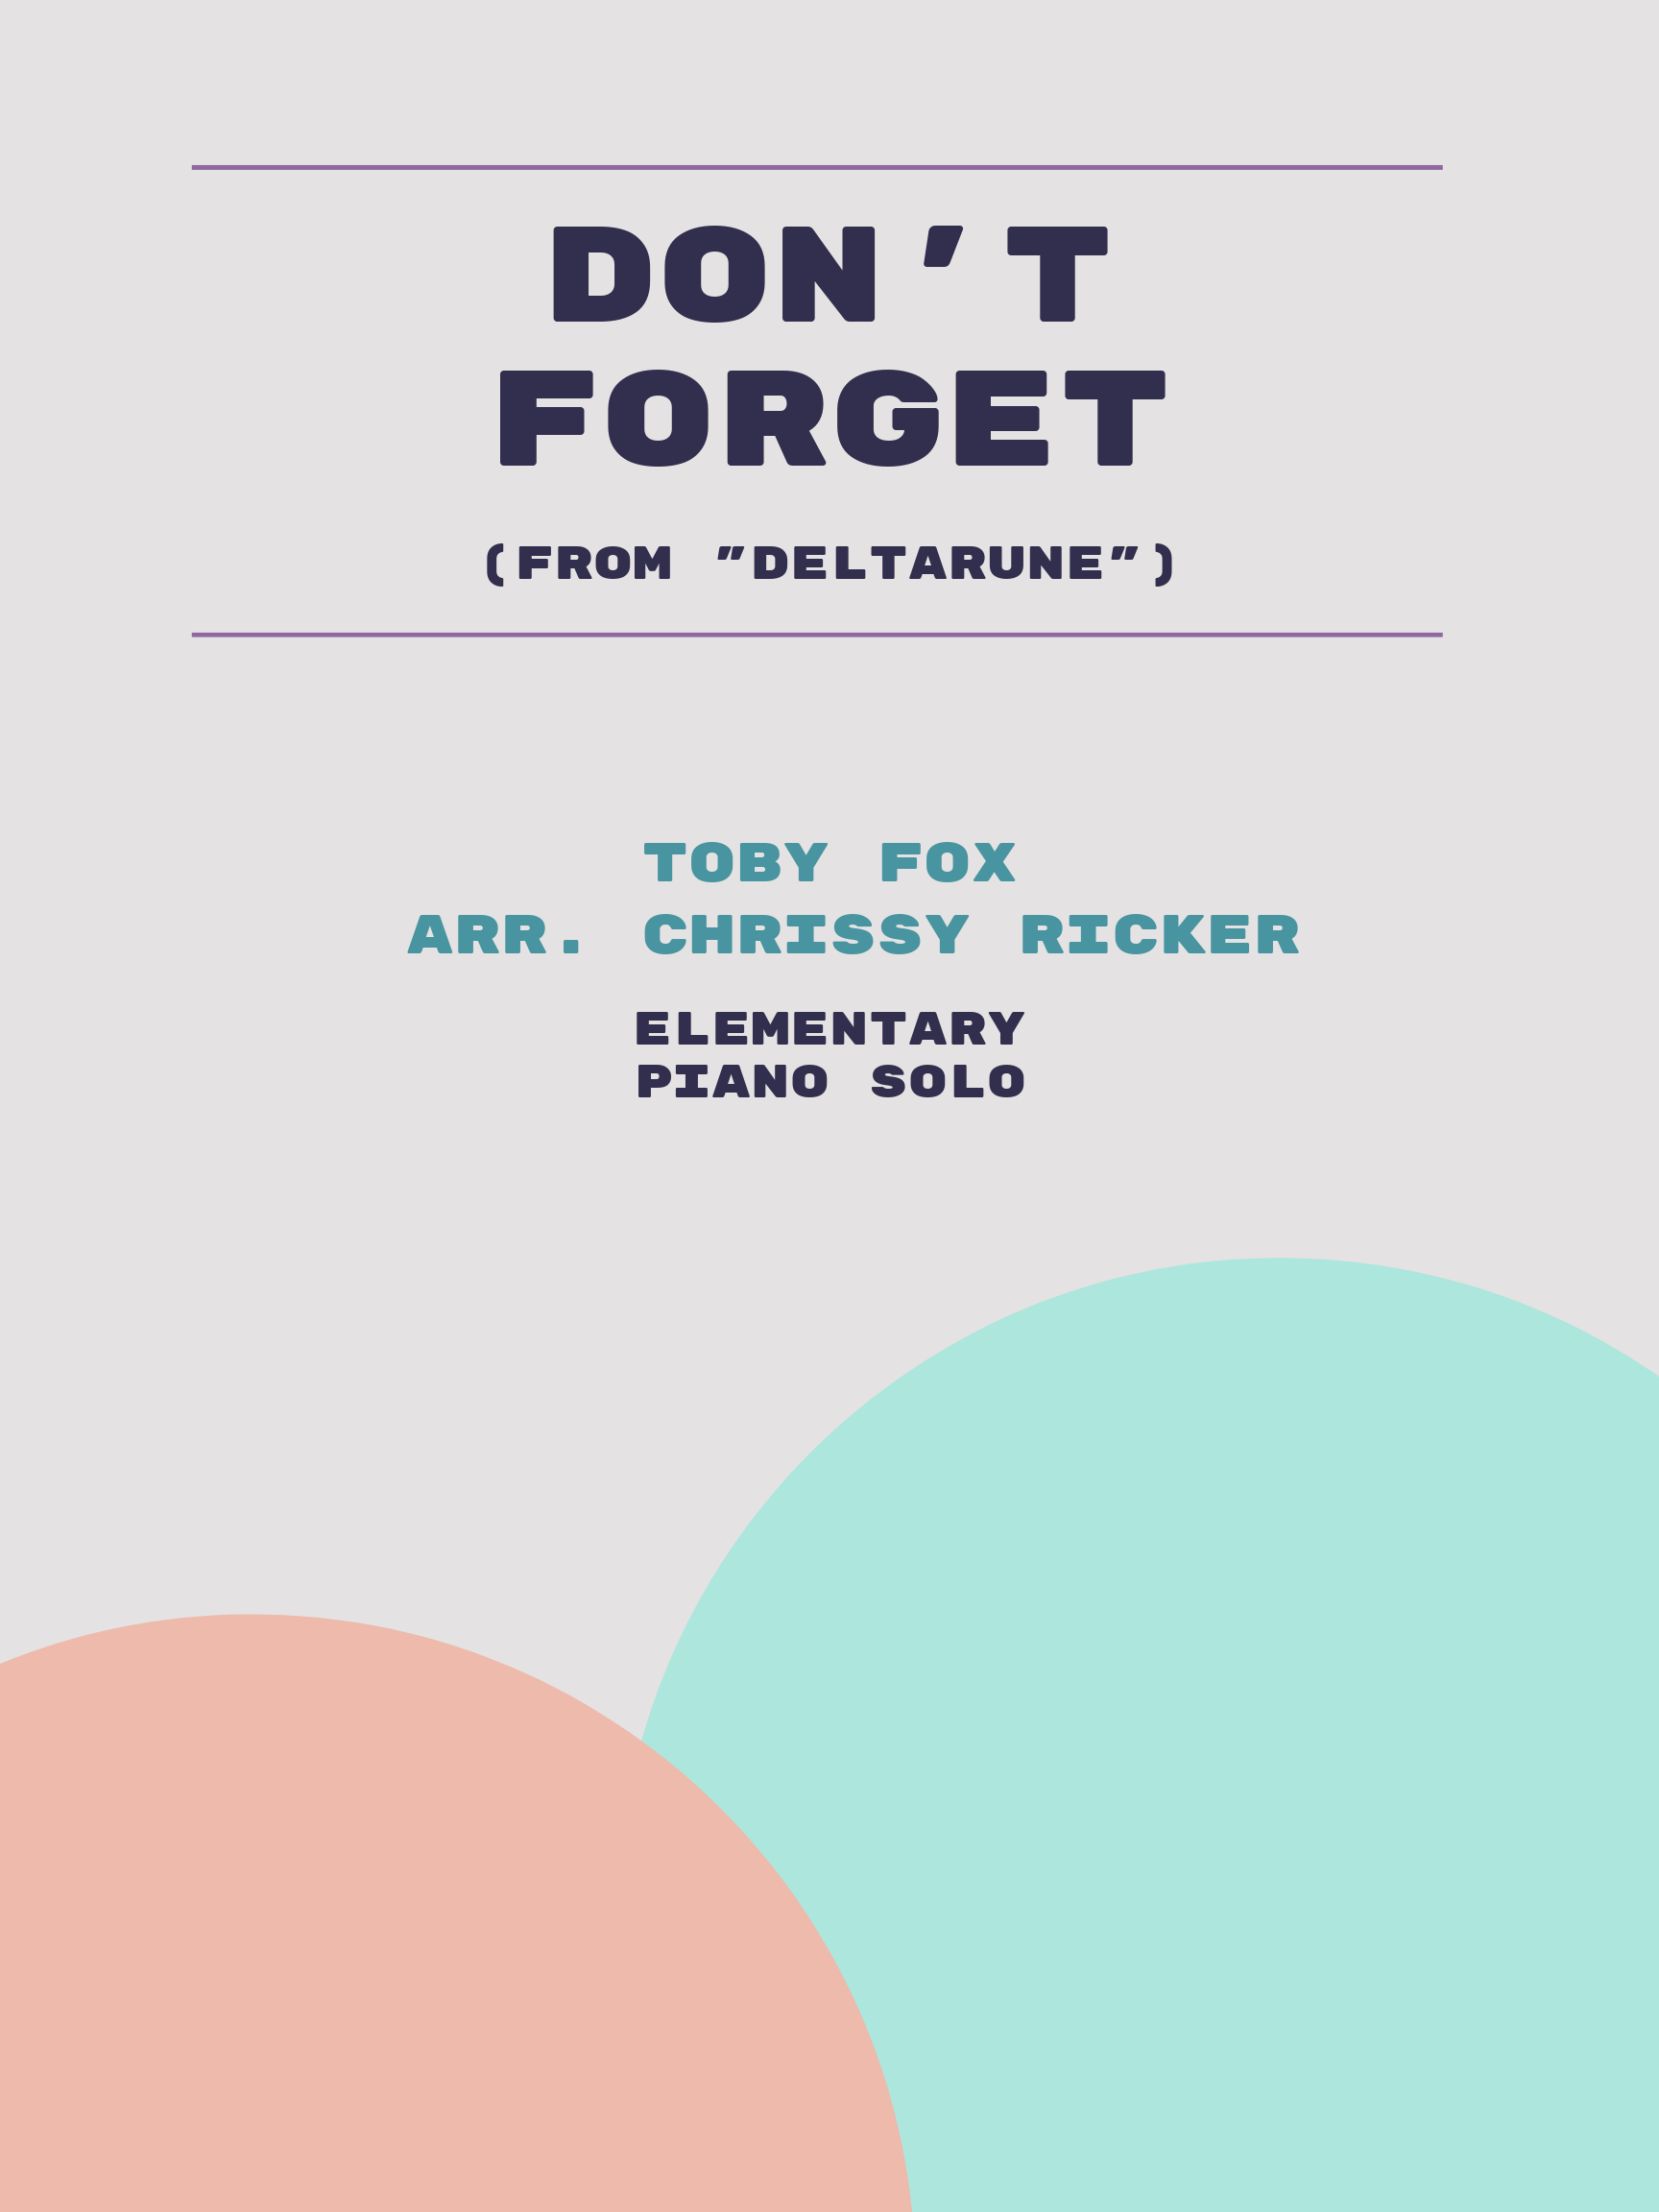 Don't Forget by Toby Fox